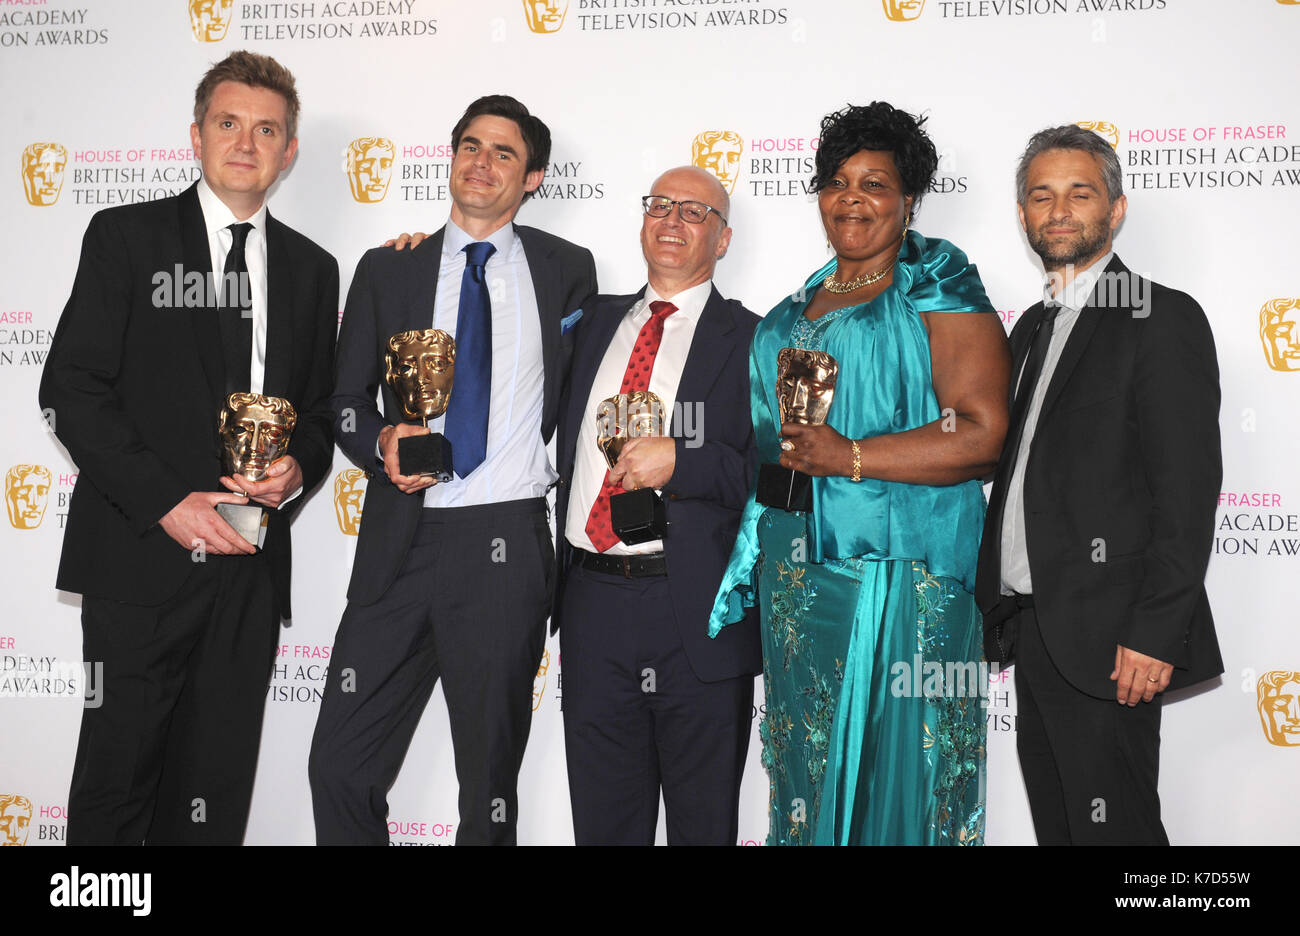 Photo Must Be Credited ©Kate Green/Alpha Press 079965 08/05/2016 Guests at the House of Fraser British Academy Television Awards Bafta Pressroom held at the Royal Festival Hall in London Stock Photo